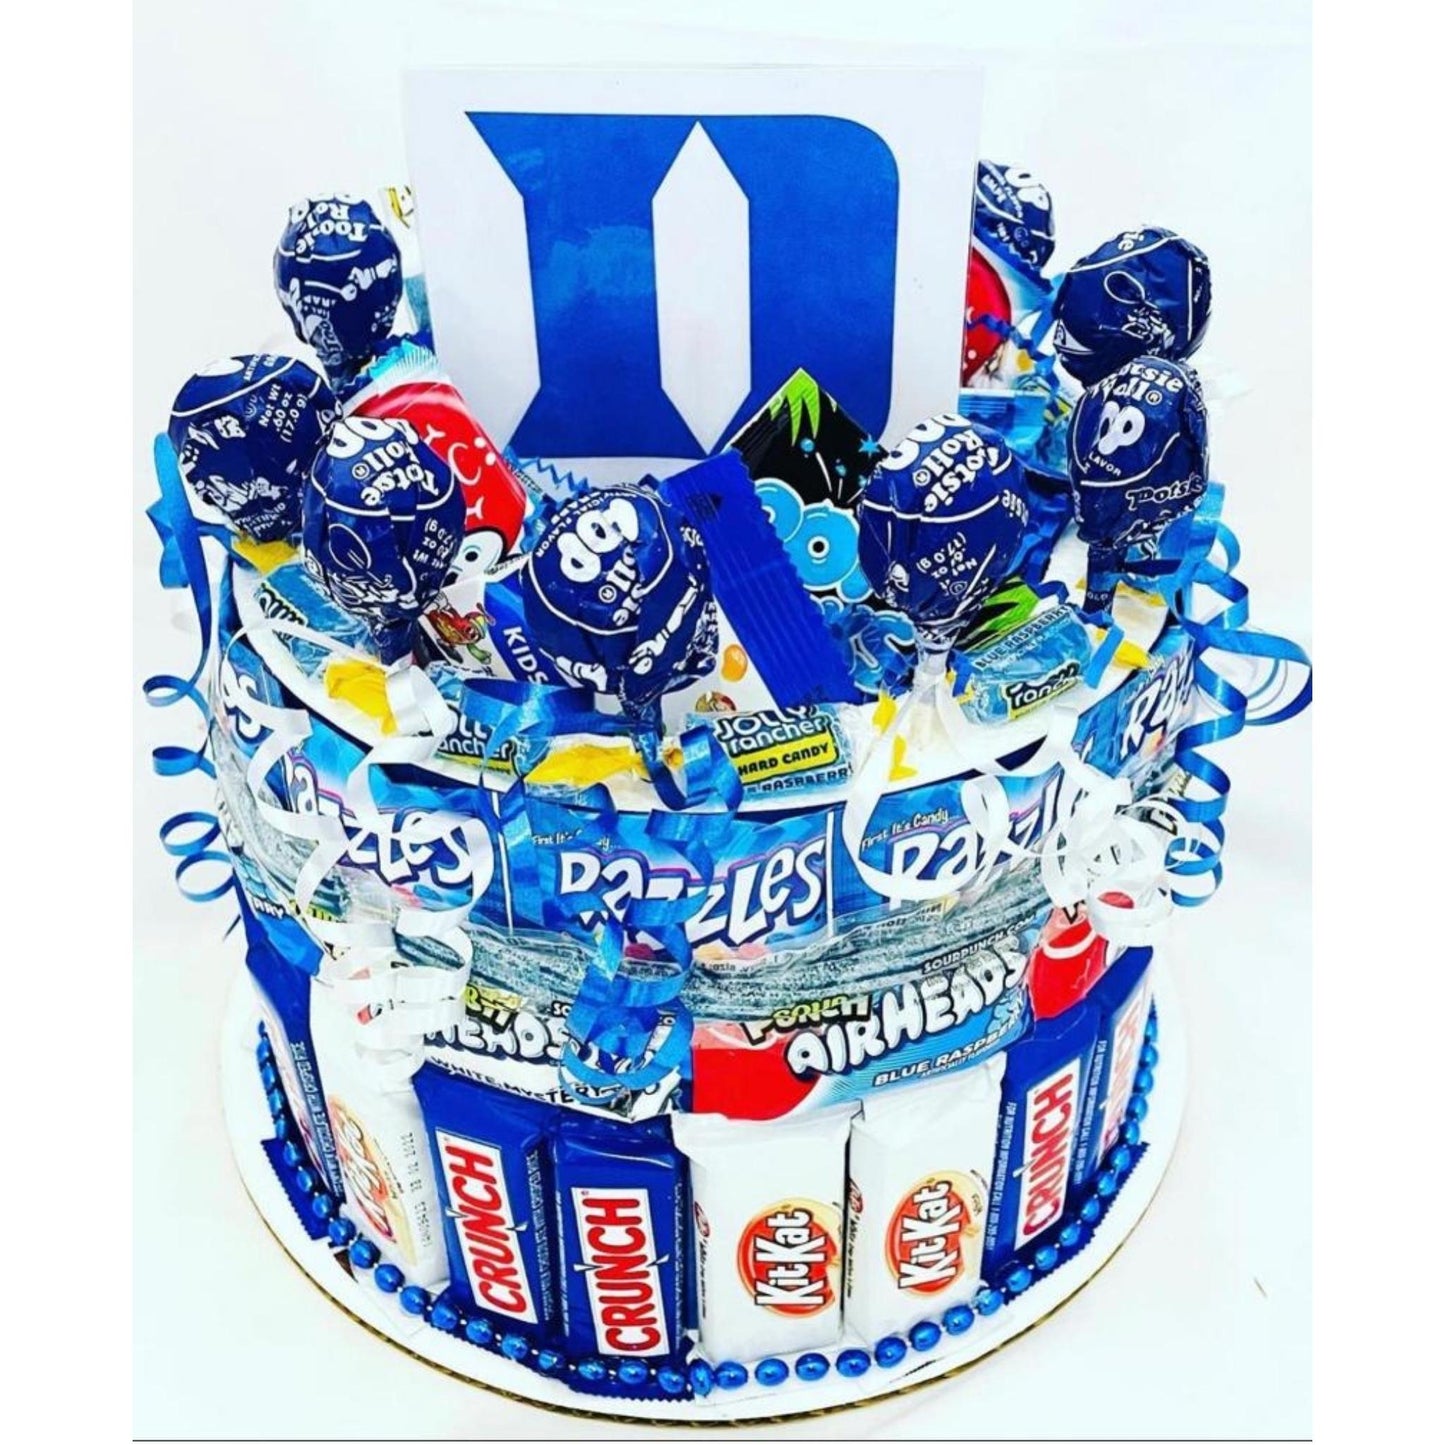 College Candy Cake Bouquets - a Spirit Animal - $45-$60 $75-$90 Candy Cake Explosion